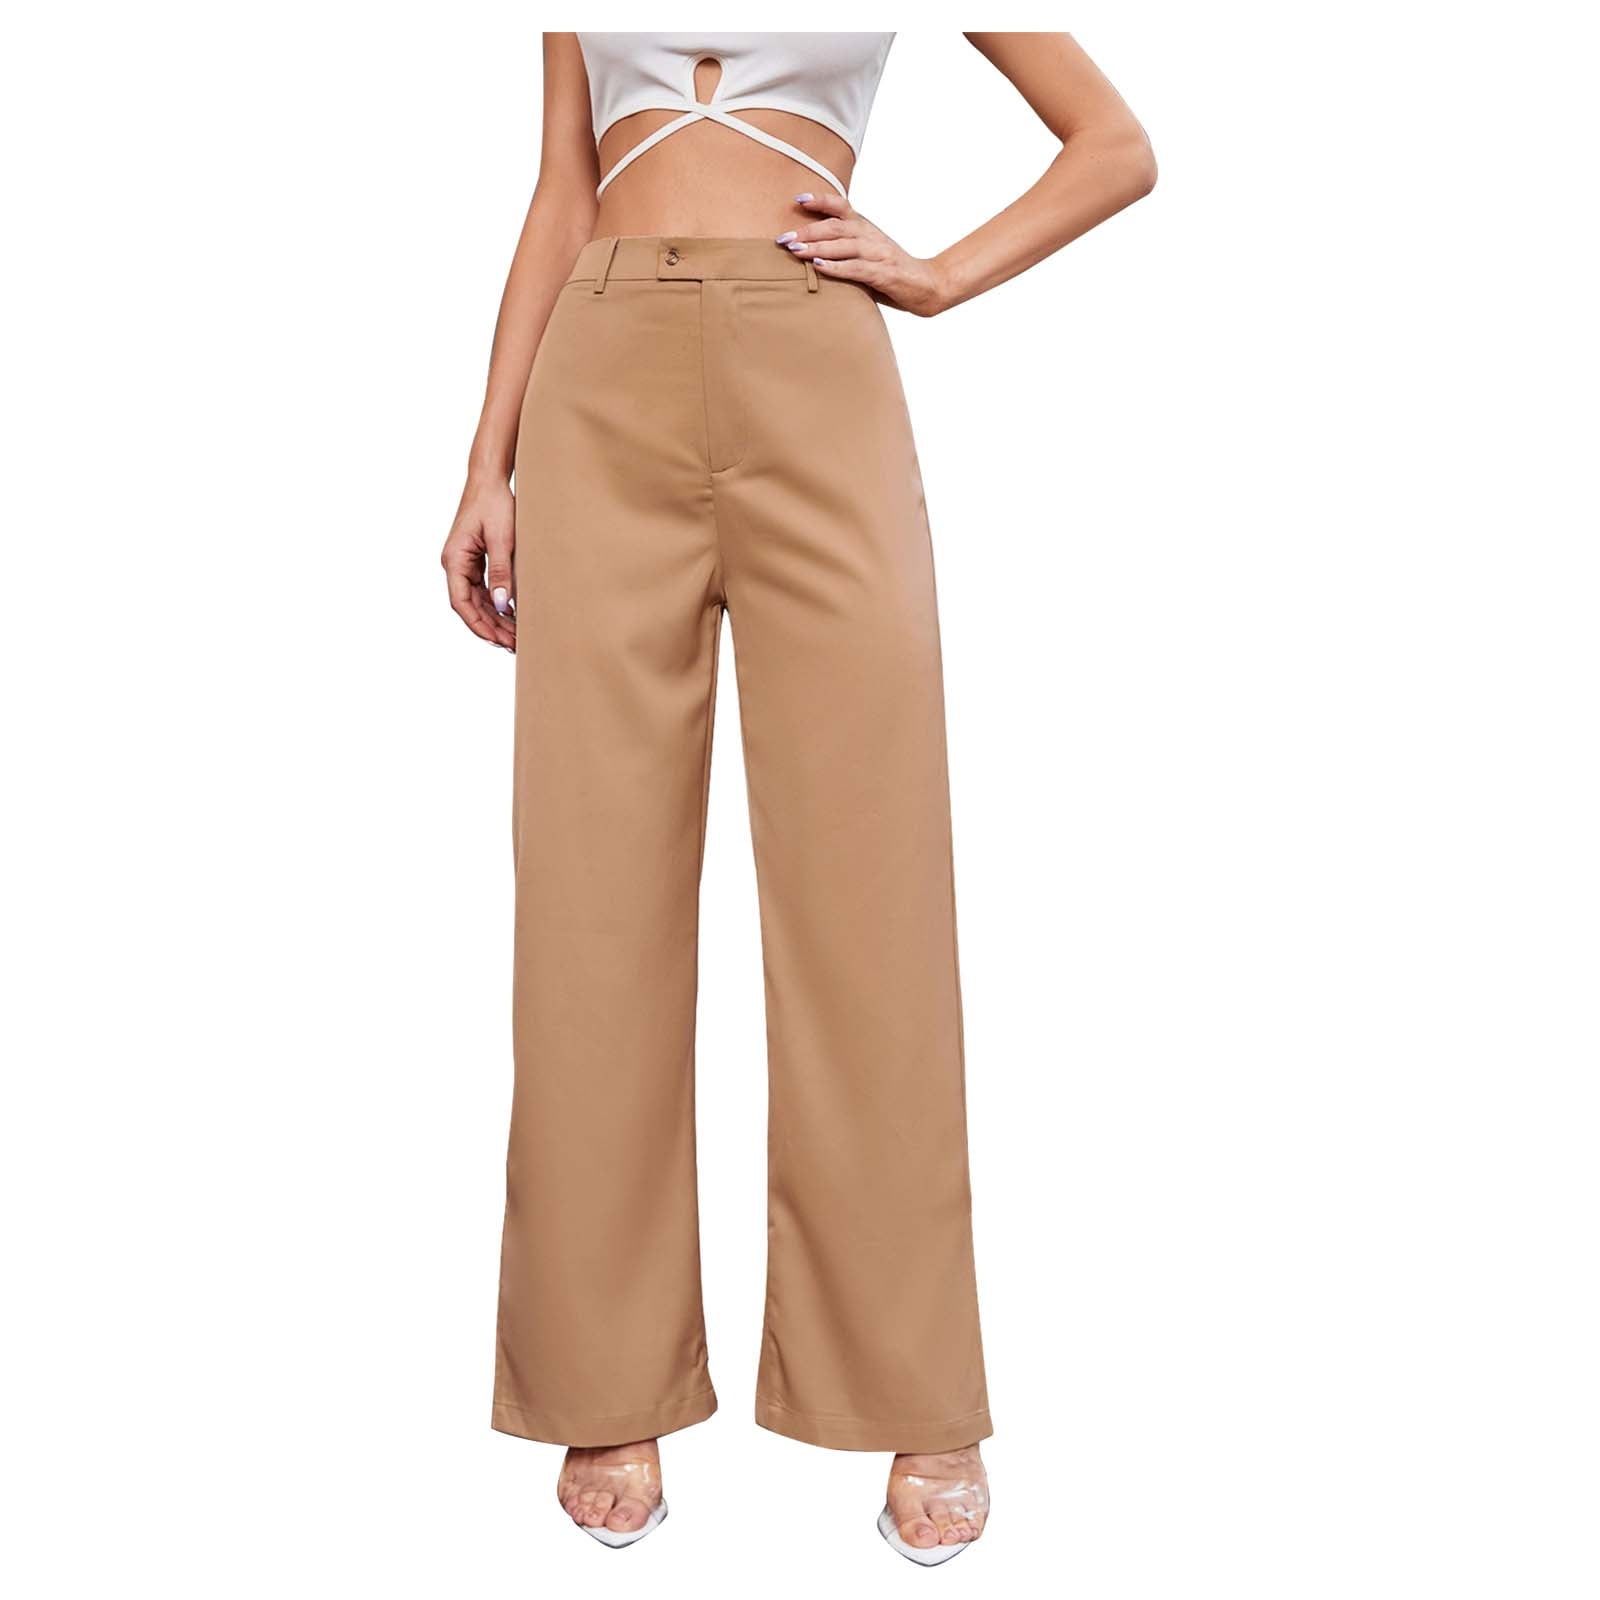 Womens Chic Long Straight Legs Formal Suit Trousers High Waist